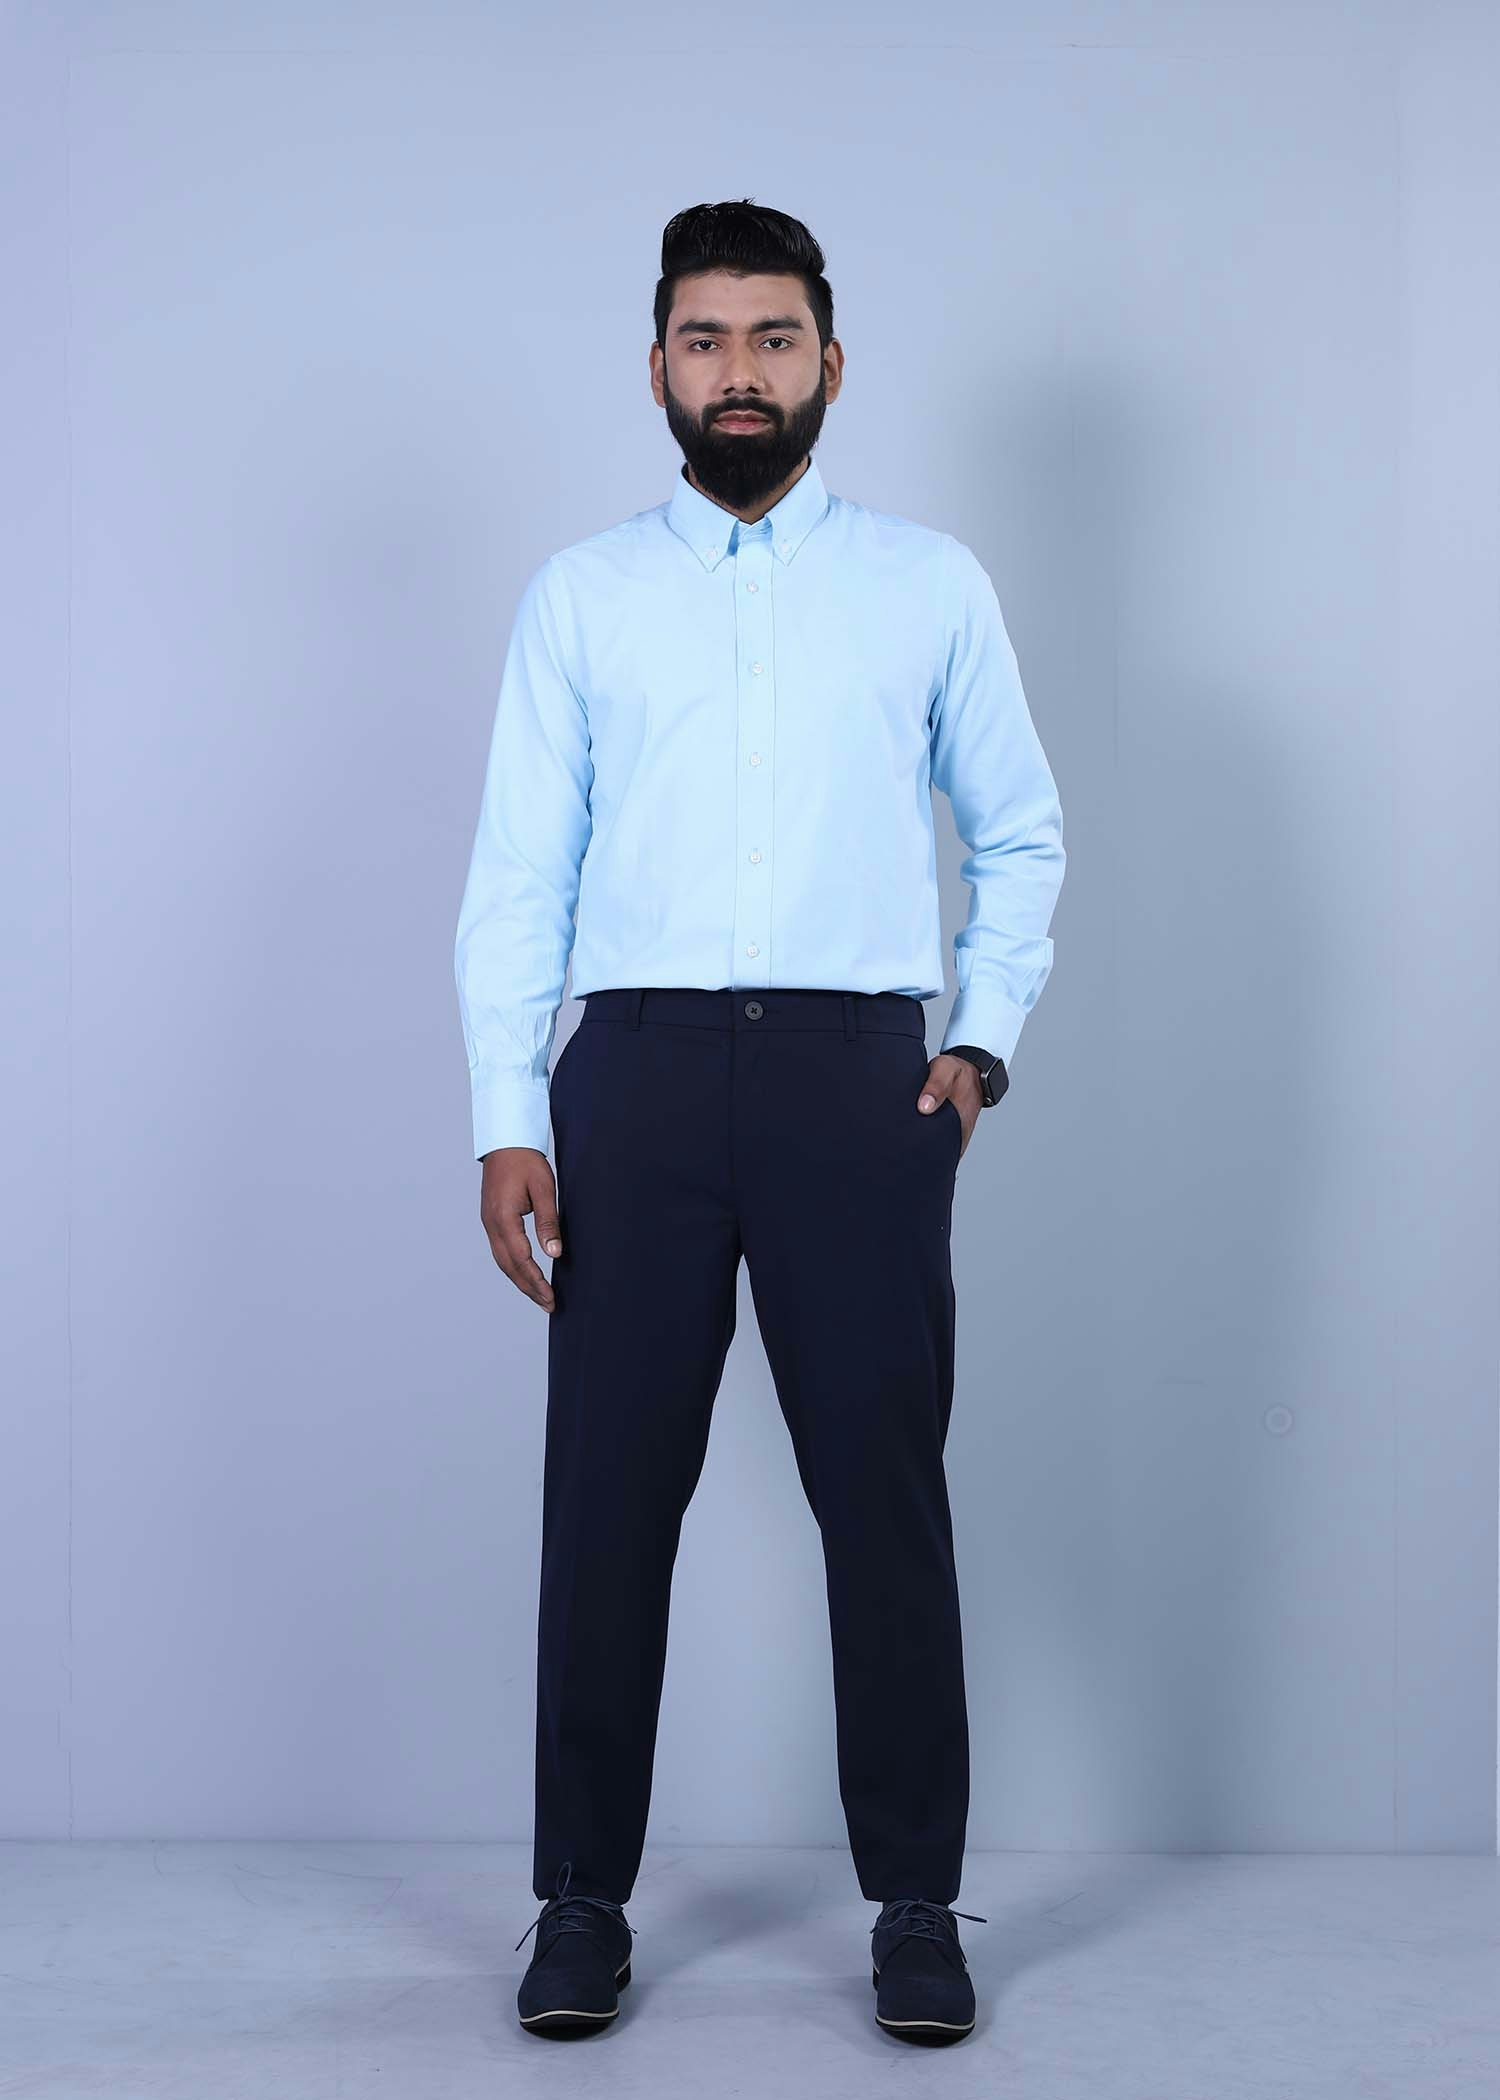 vienna i fromal pant dark blue color full front view